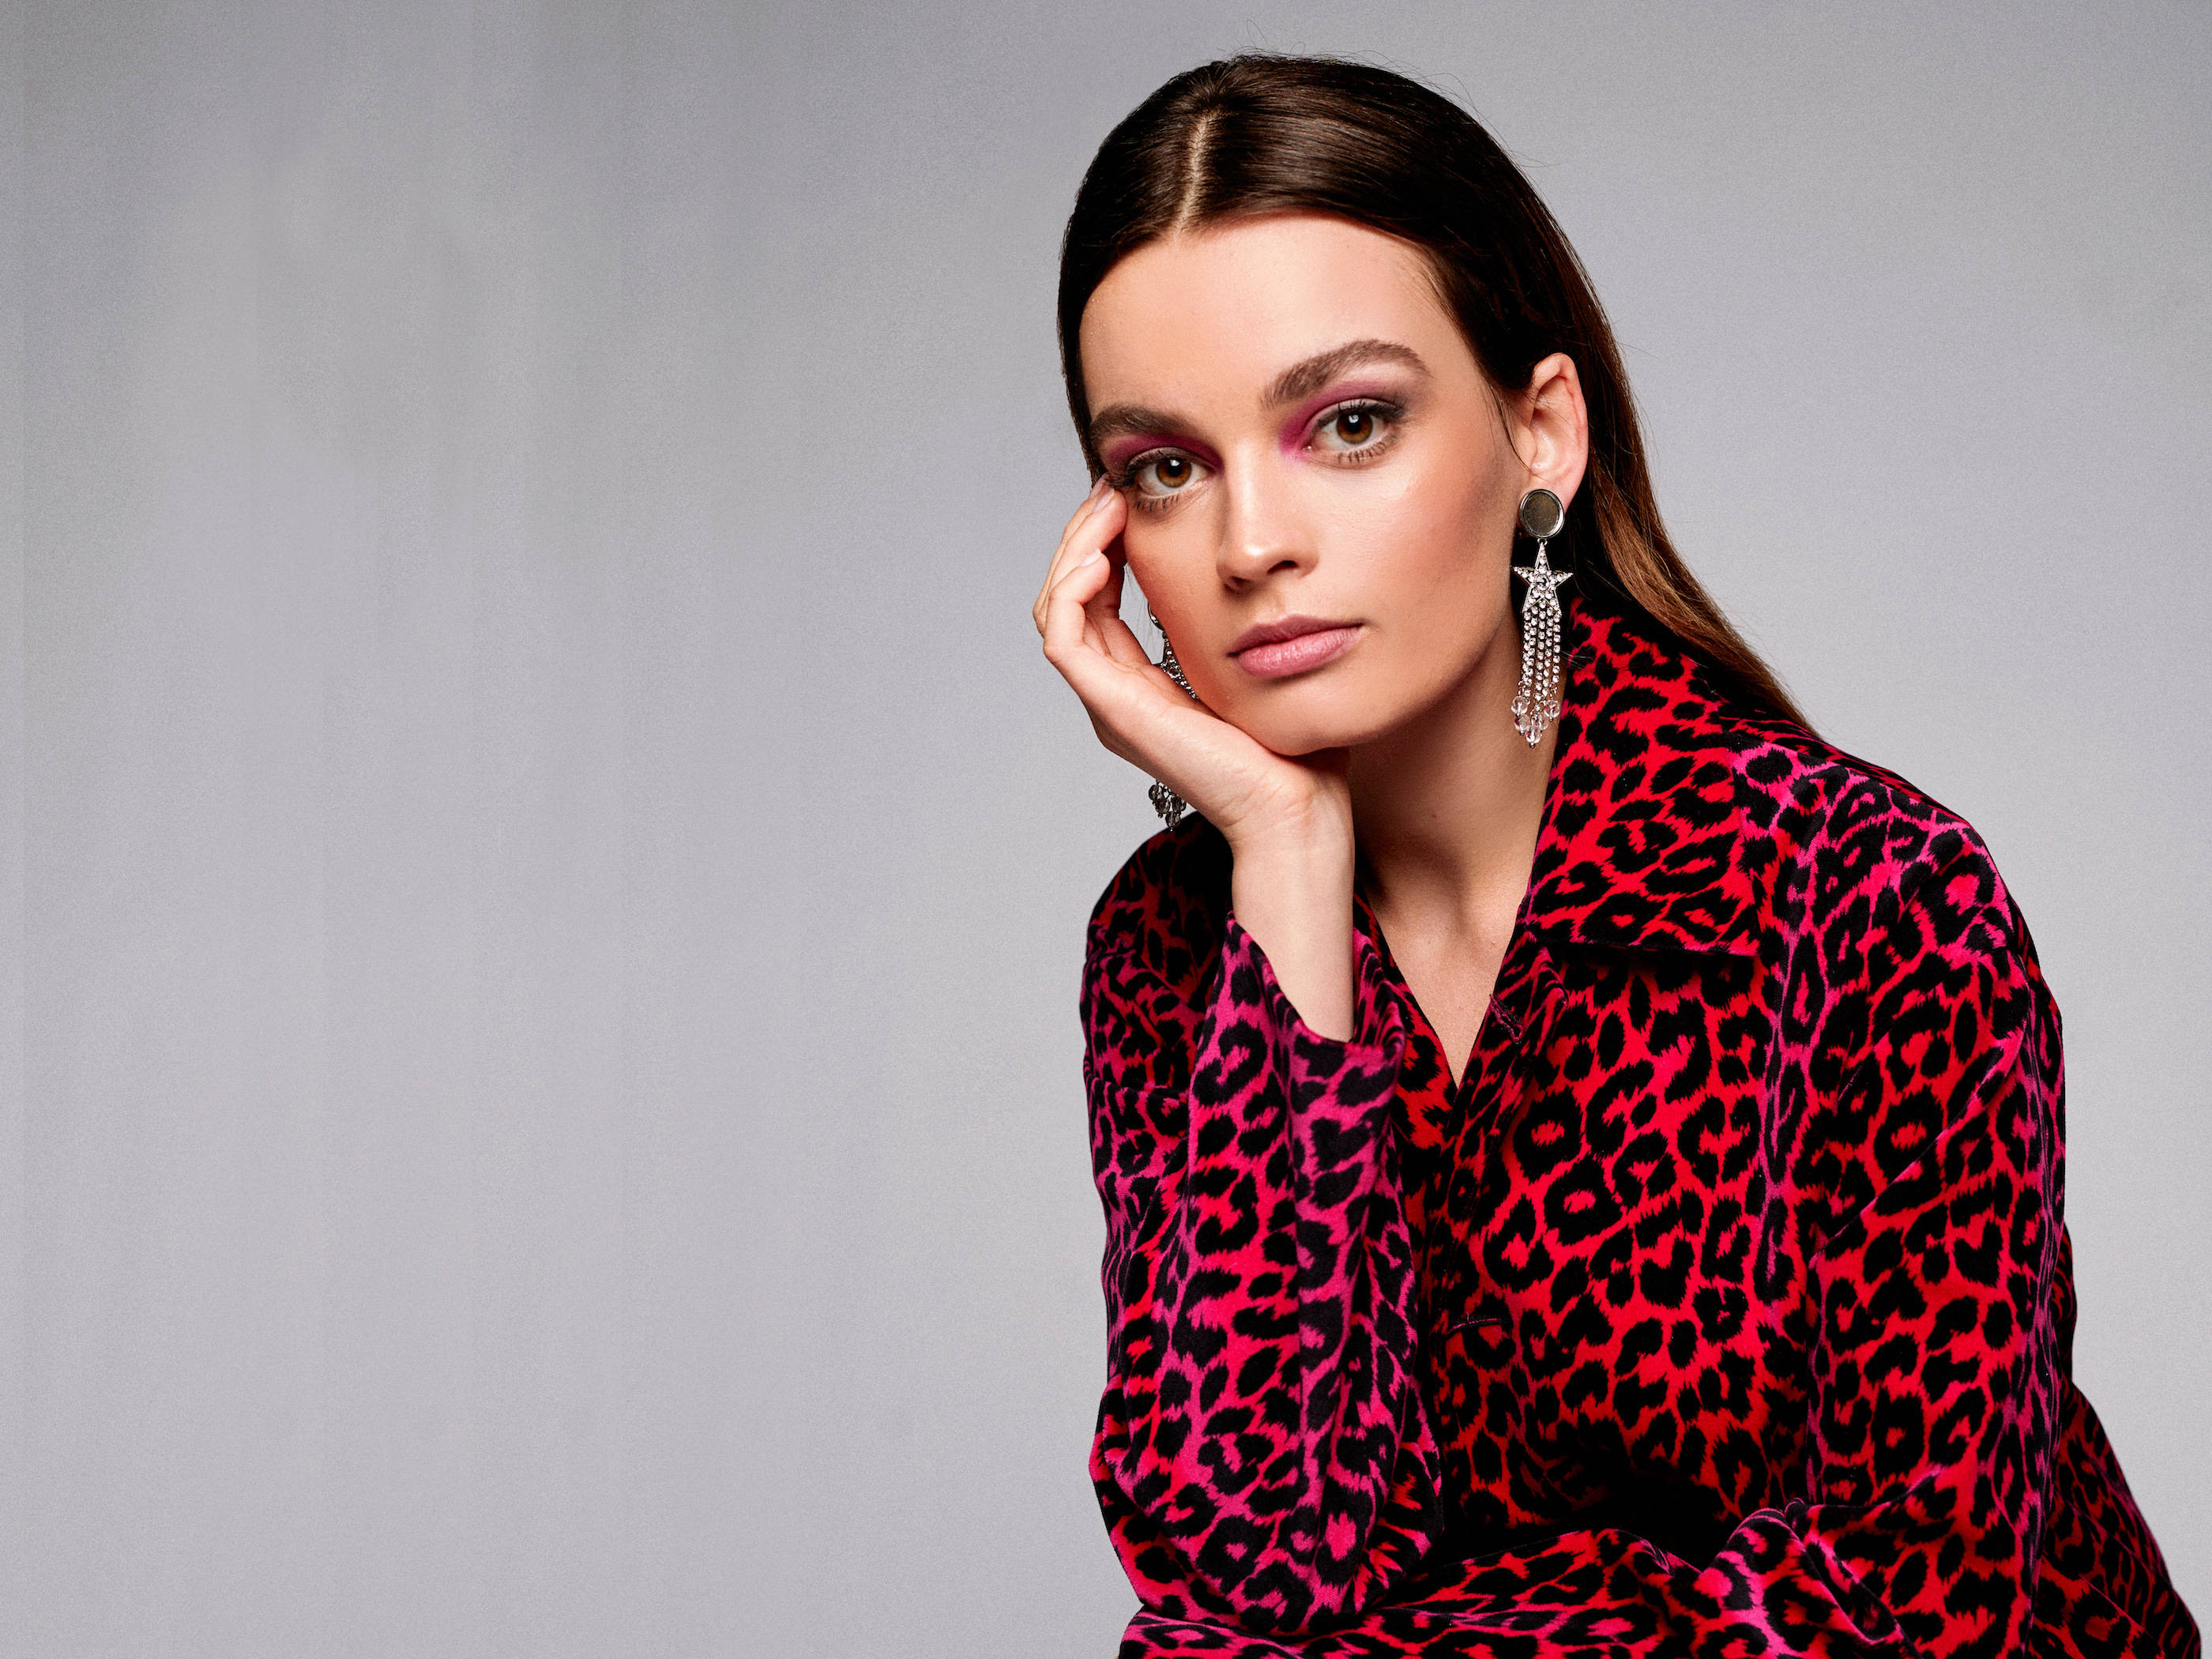 An Image Featuring Actress Emma Mackey Wearing A Trendy And Fashionable Leopard Printed Outfit Paired With Star Earrings.